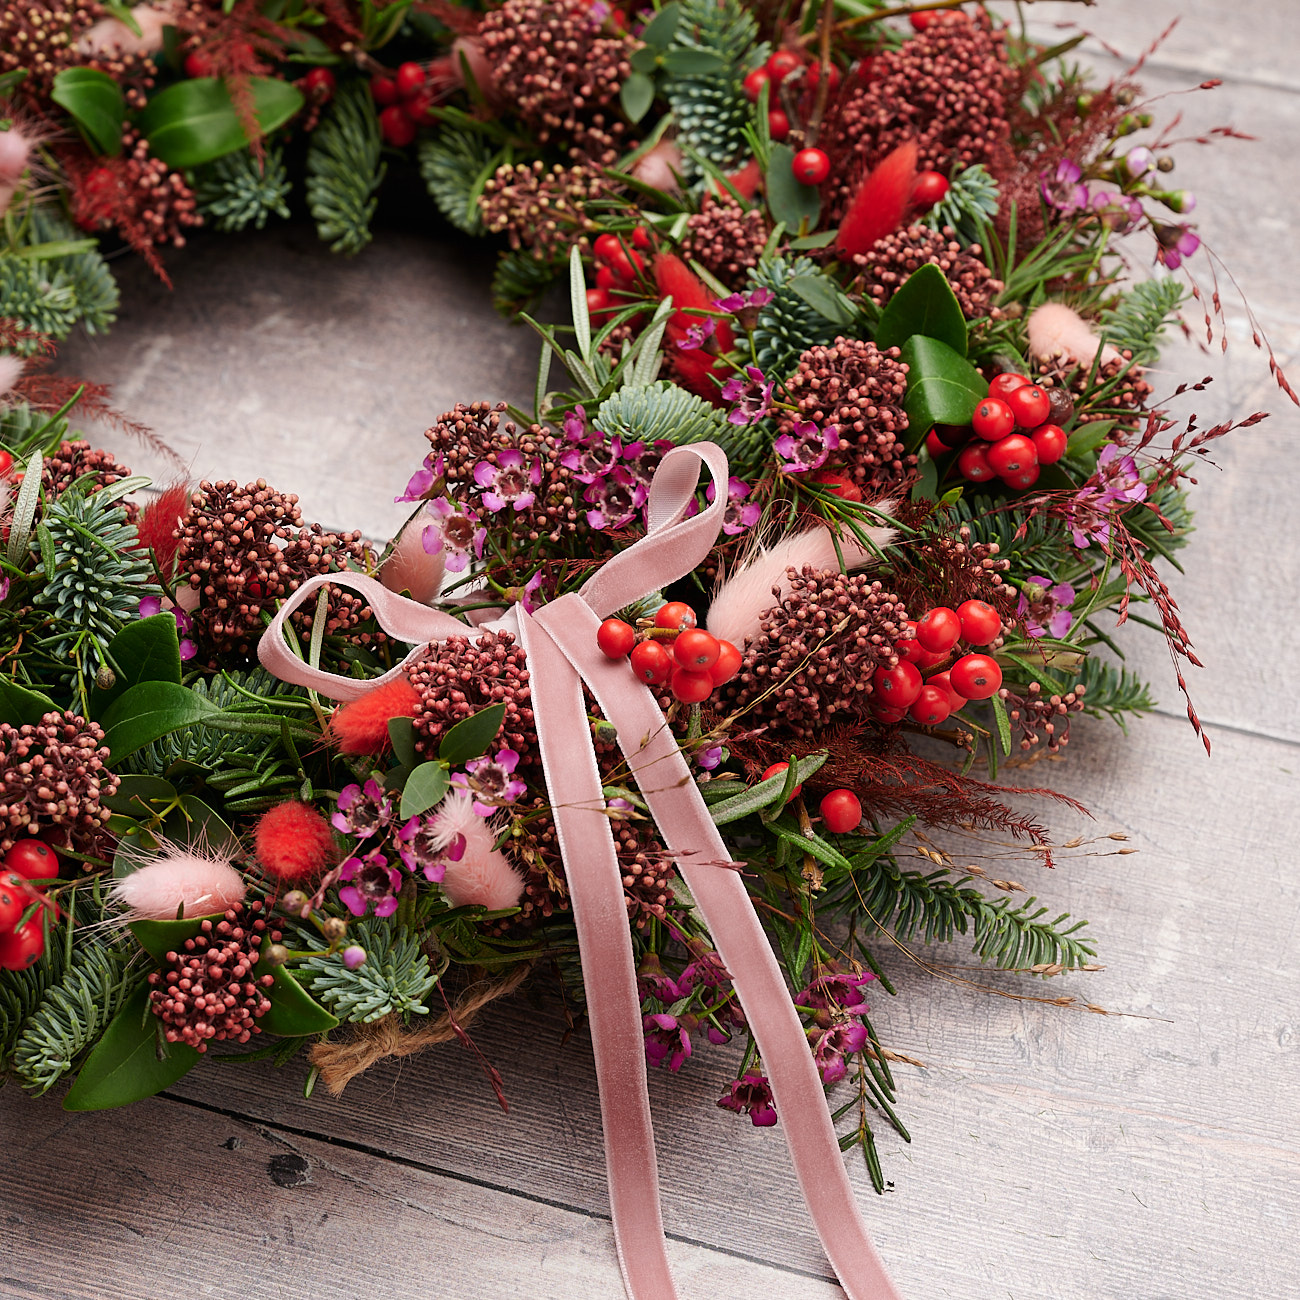 When Do You Put Up and Take Down a Christmas Wreath?